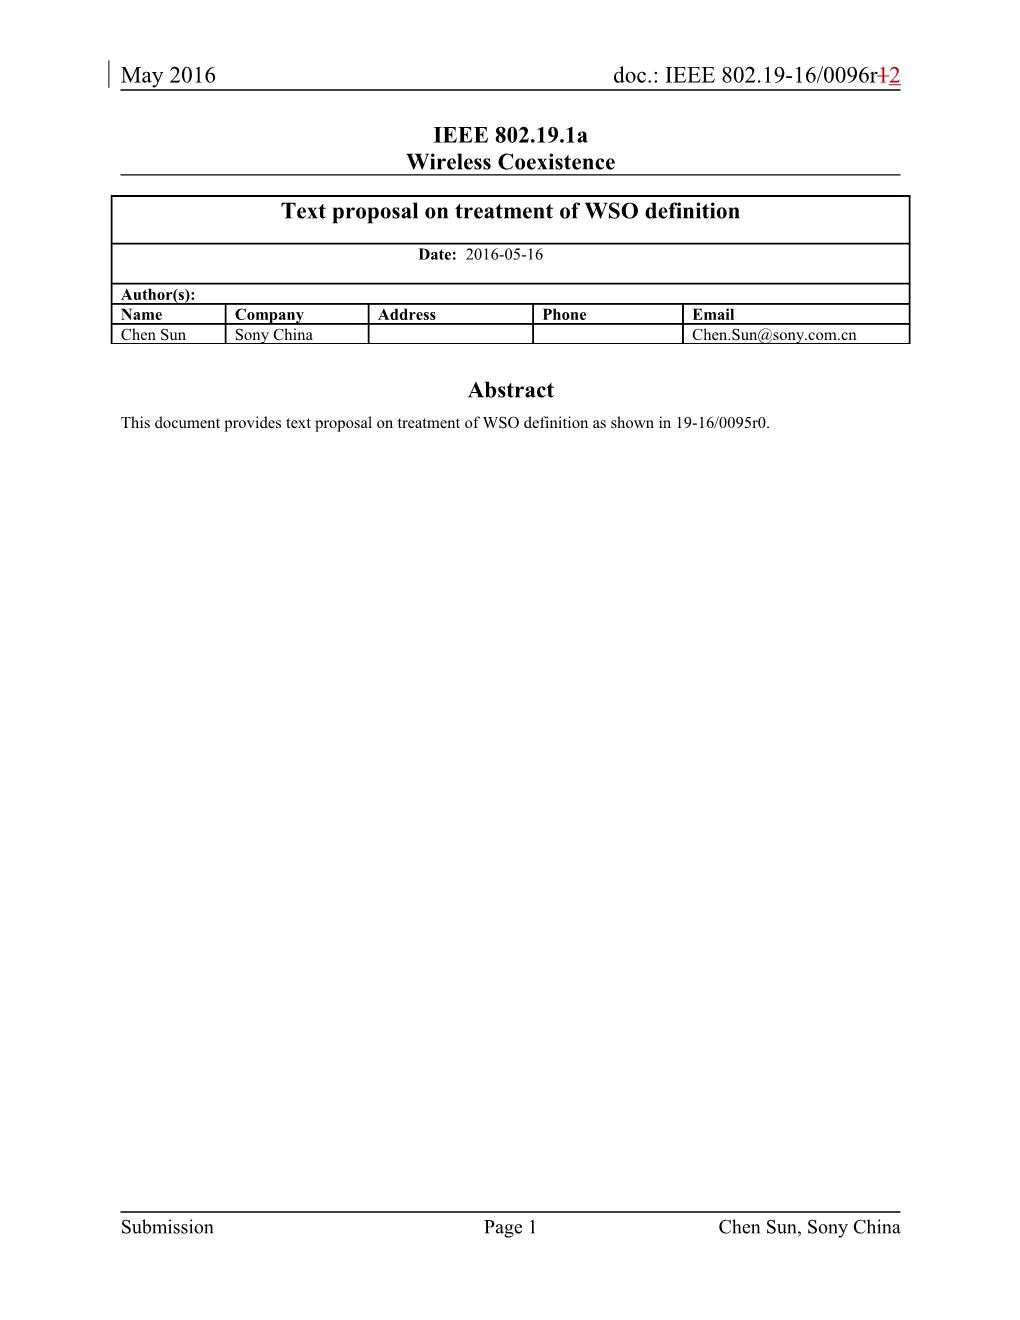 This Document Provides Text Proposal on Treatment of WSO Definition As Shown in 19-16/0095R0